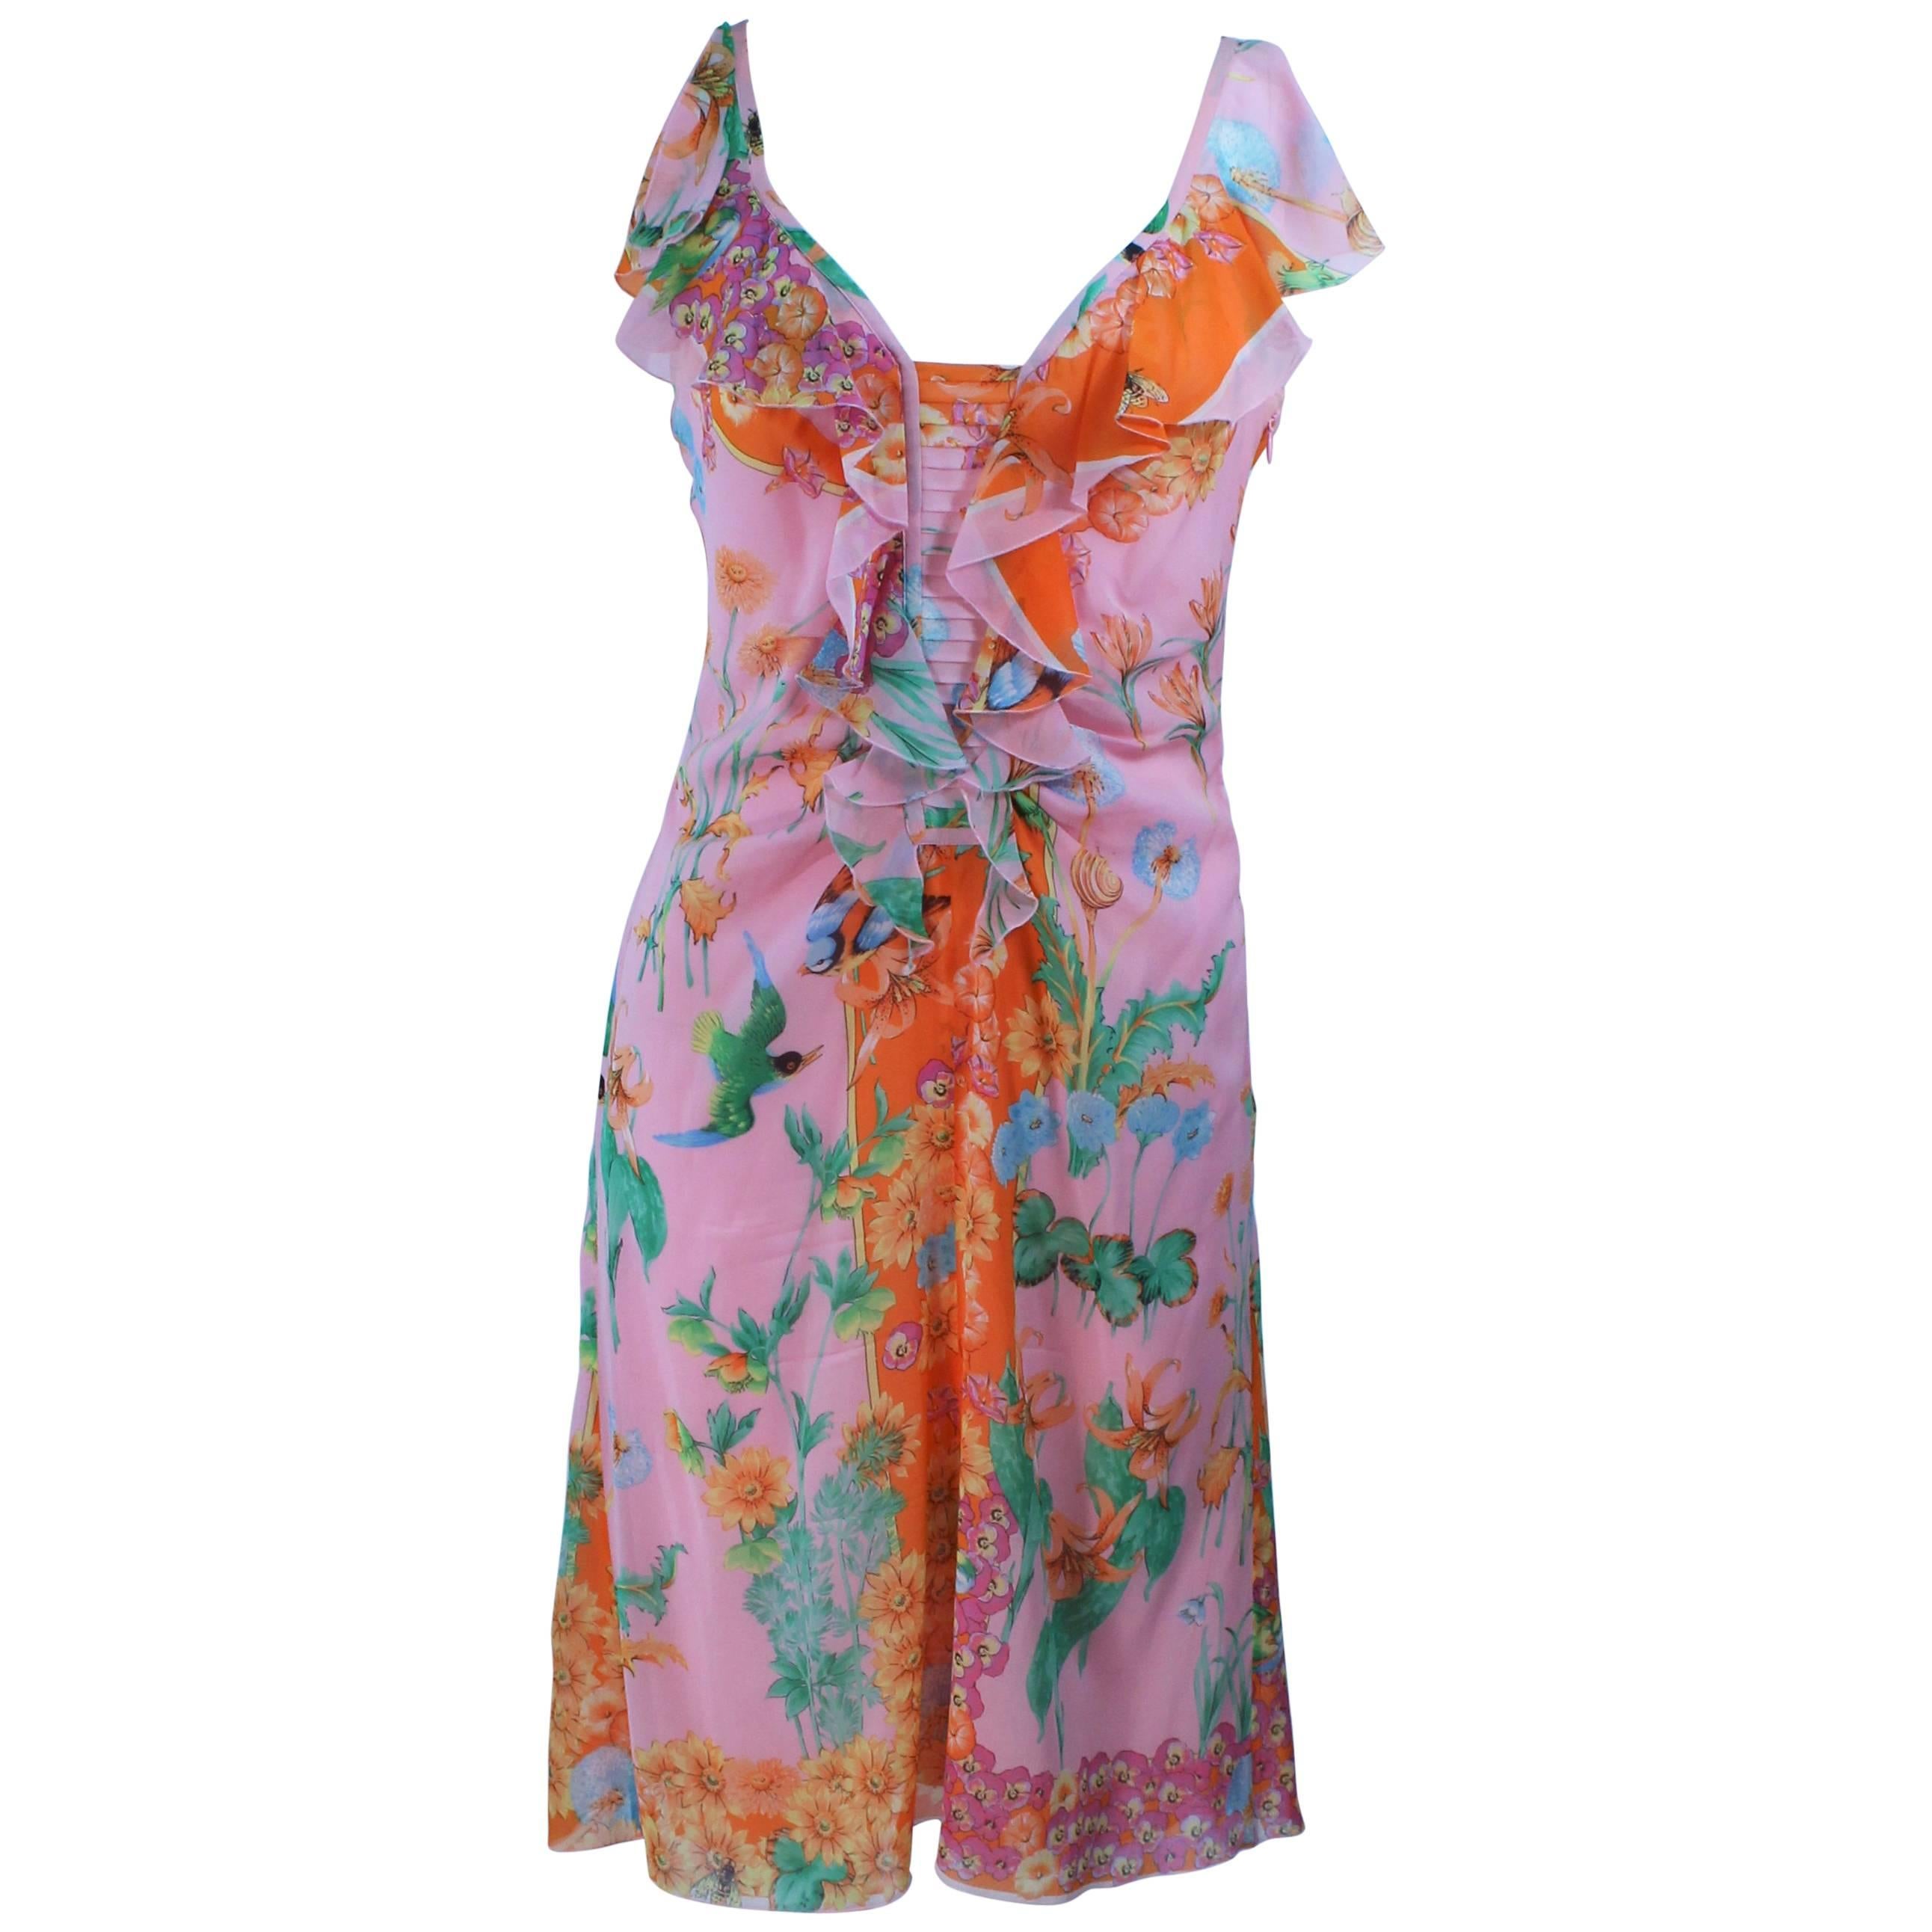 VERSACE Stretch Ruffled Silk Dress with Floral Print Size 42